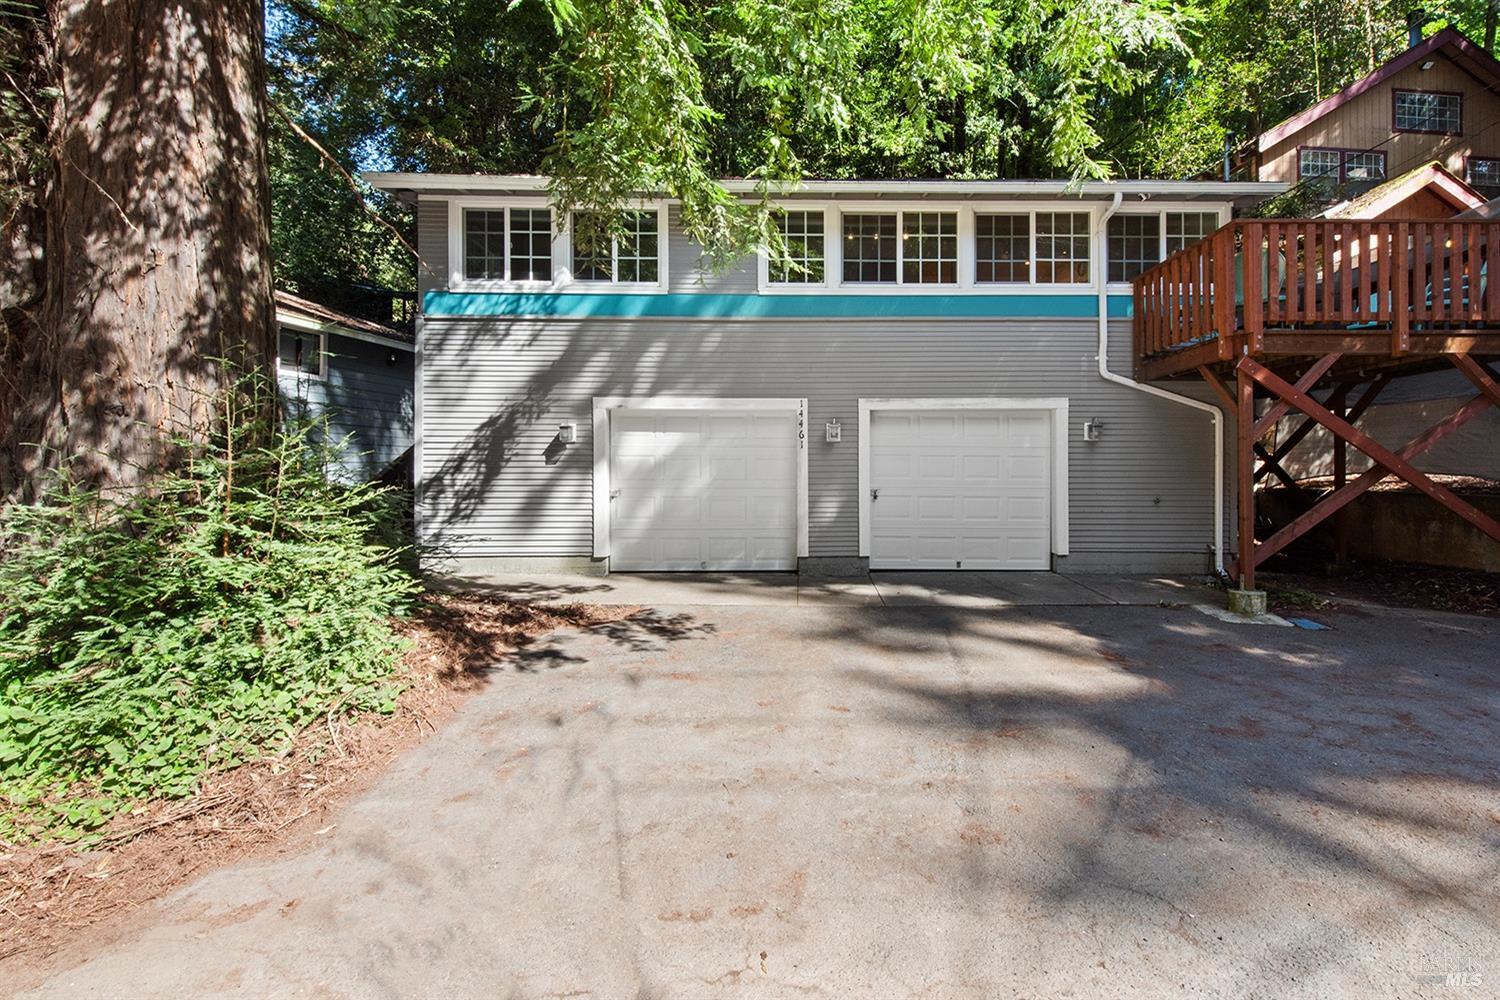 Photo of 14461 Old Cazadero Rd in Guerneville, CA